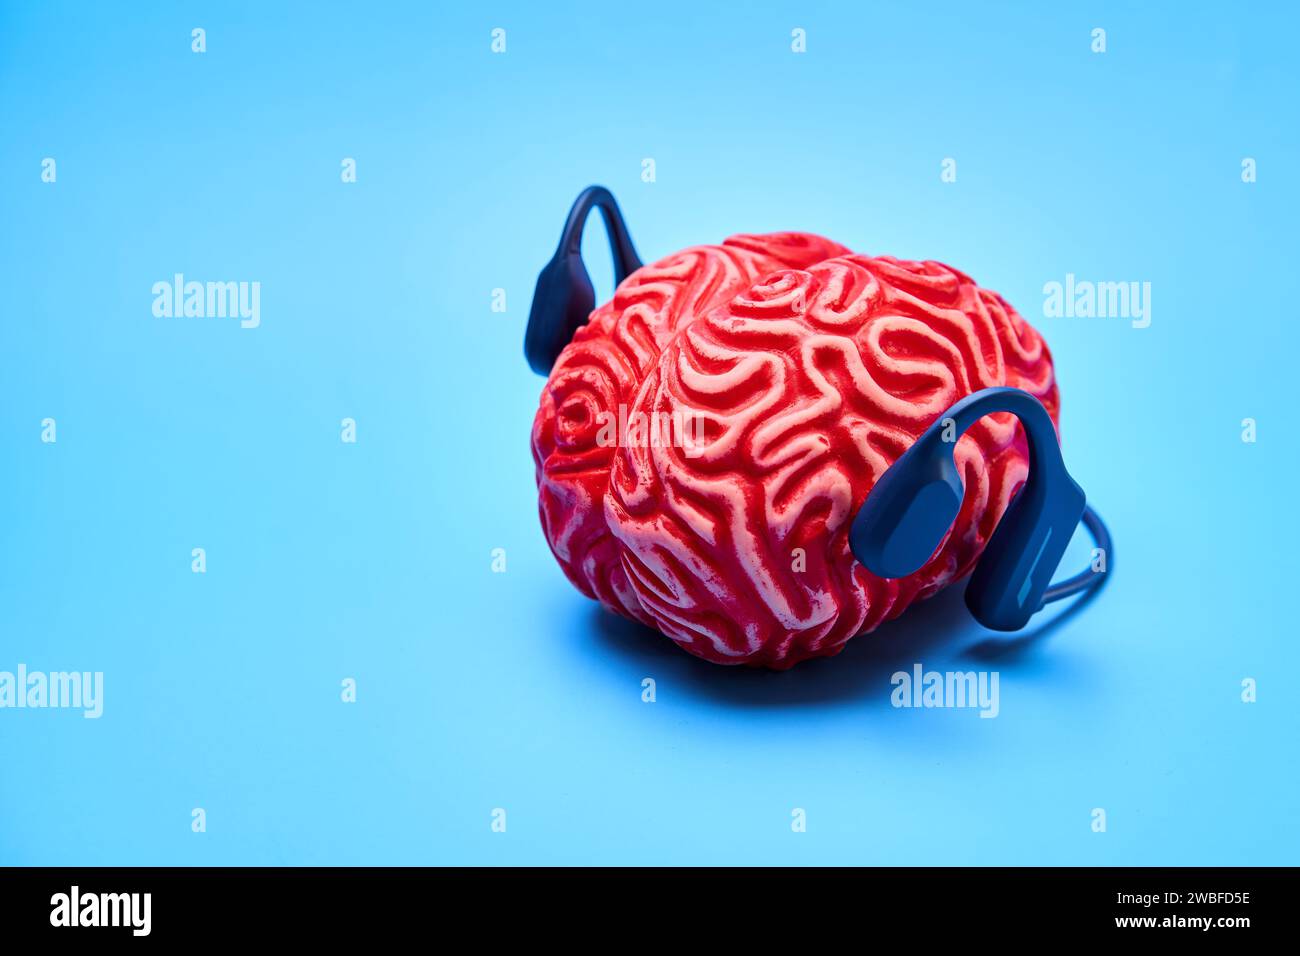 Red rubber brain with headphones on a blue surface. Brain rest concept. Stock Photo